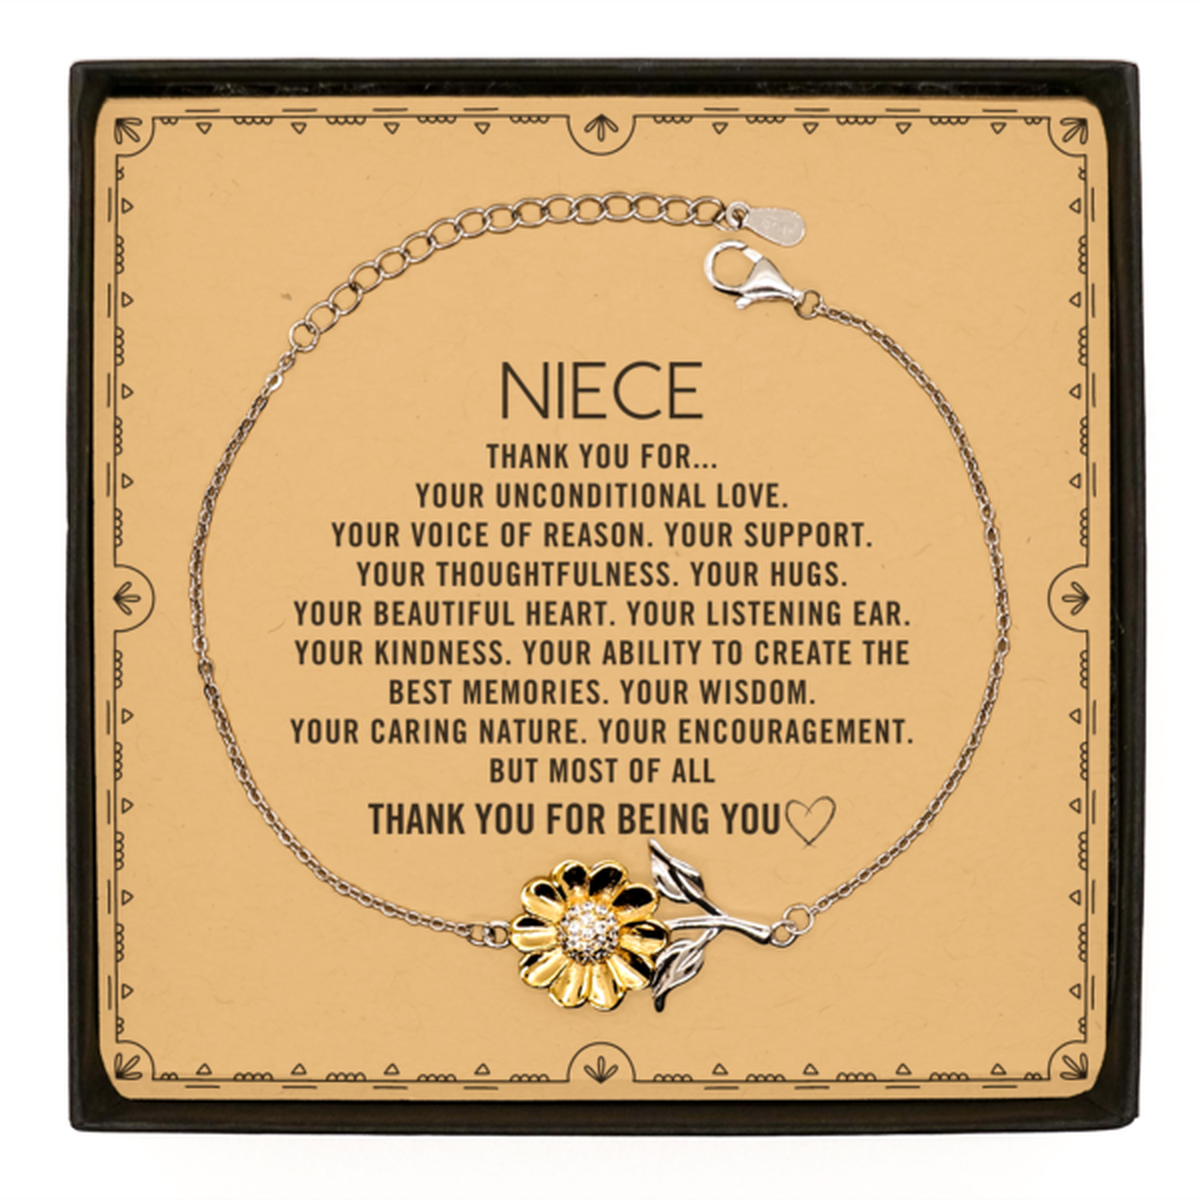 Niece Sunflower Bracelet Custom, Message Card Gifts For Niece Christmas Graduation Birthday Gifts for Men Women Niece Thank you for Your unconditional love